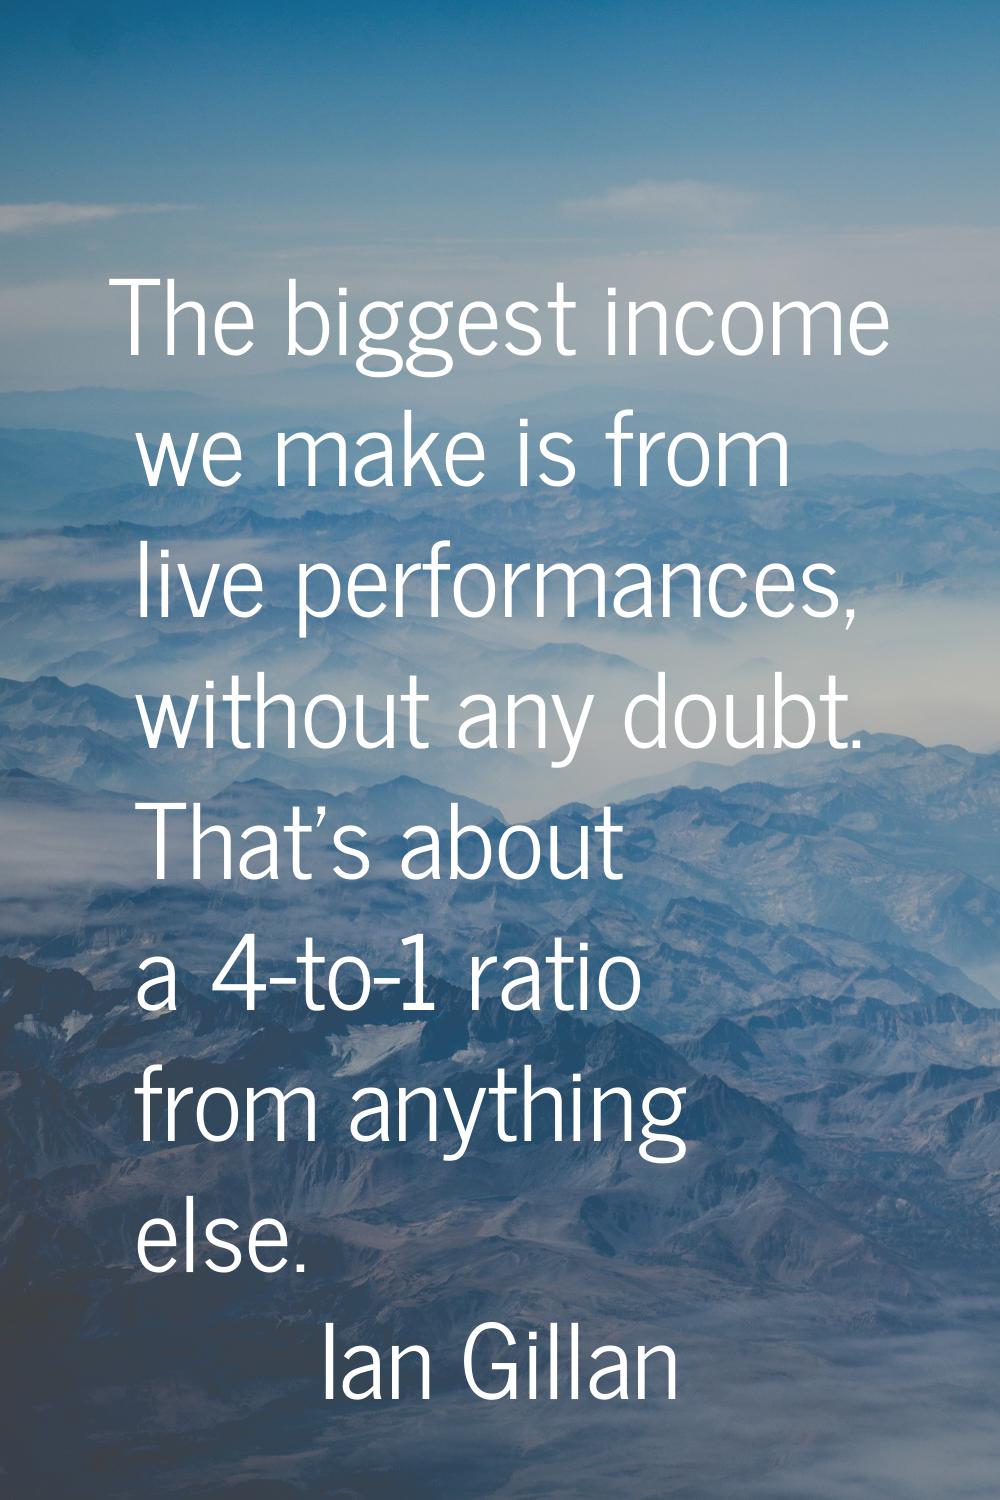 The biggest income we make is from live performances, without any doubt. That's about a 4-to-1 rati